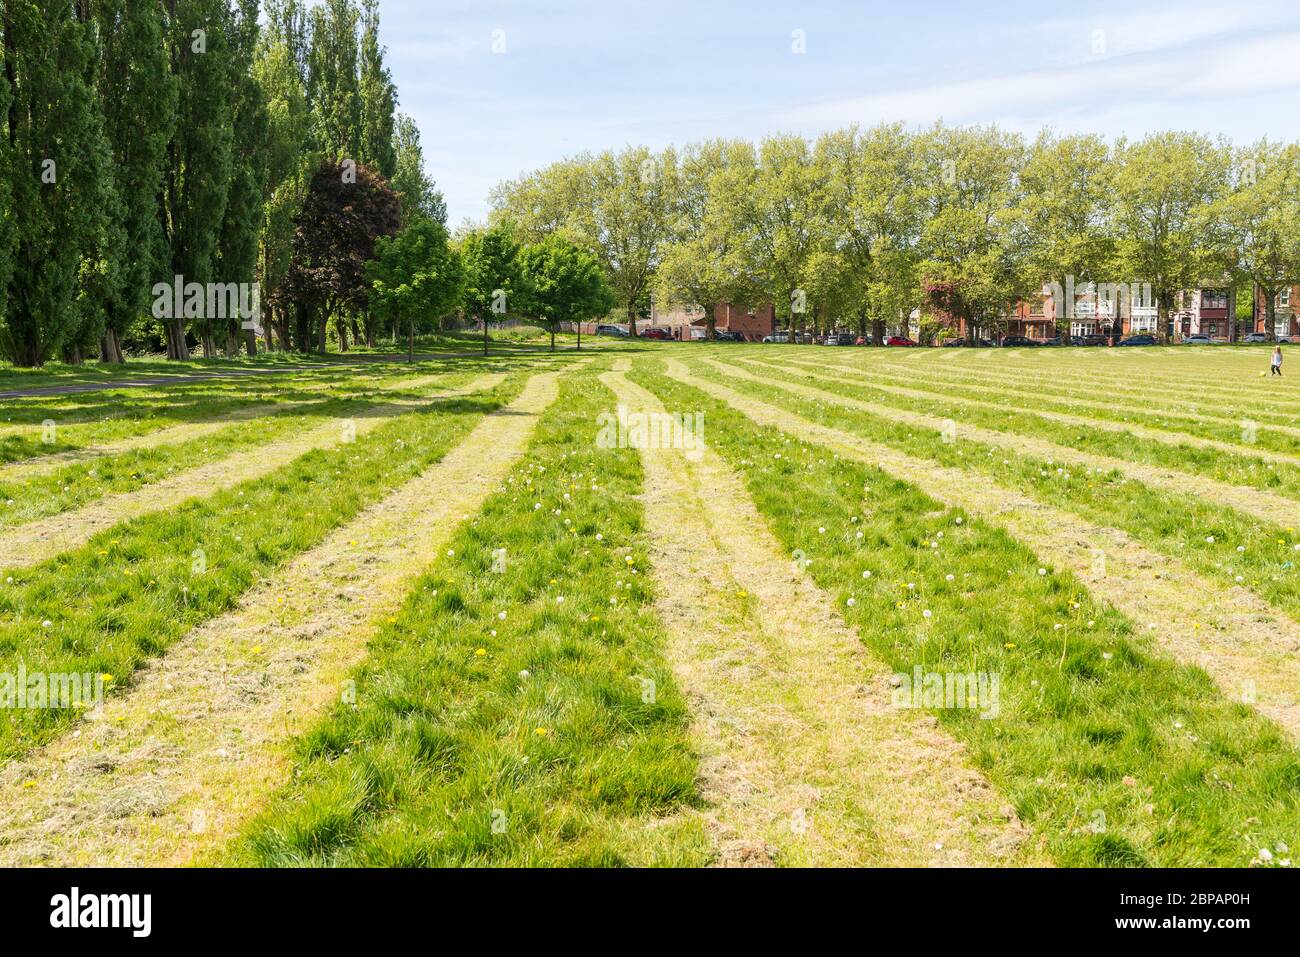 Birmingham City Council has cut the grass in two metre strips in public spaces to encourage social distancing during the cover 19 pandemic Stock Photo